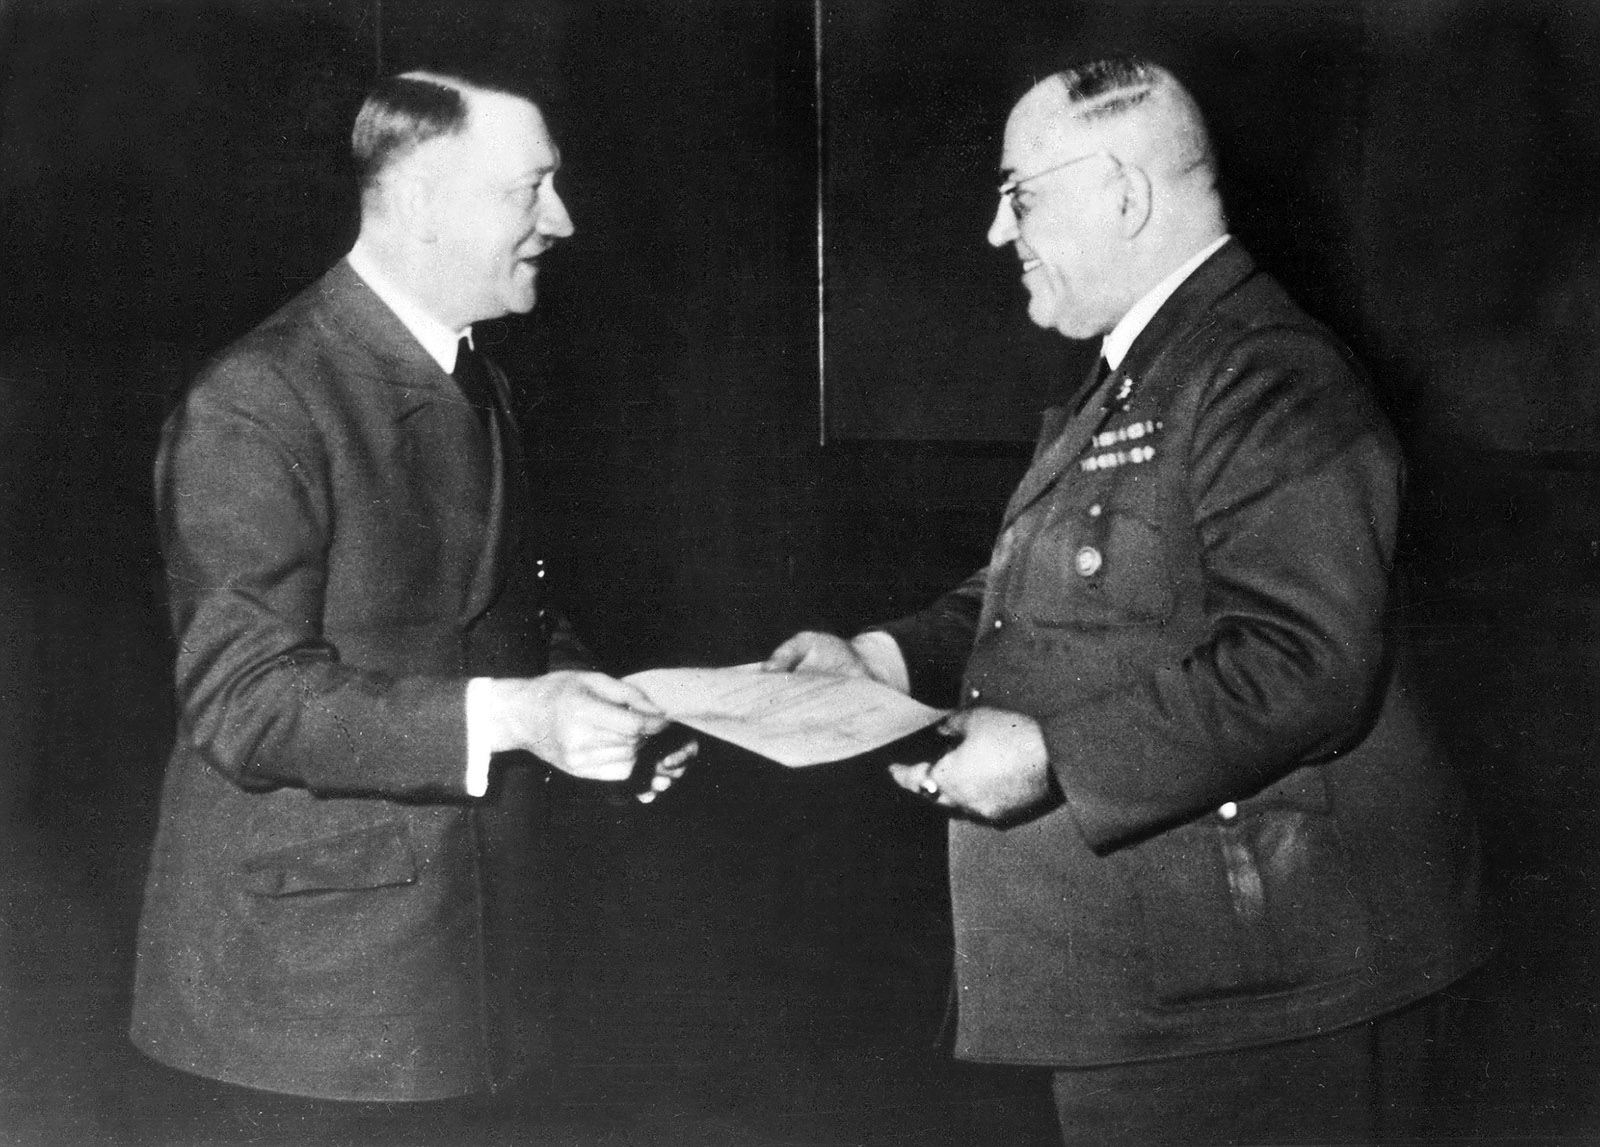 Adolf Hitler presenting Theodor Morell, his personal physician, with the Knight’s Cross of the War Merit Cross at his headquarters, 1944